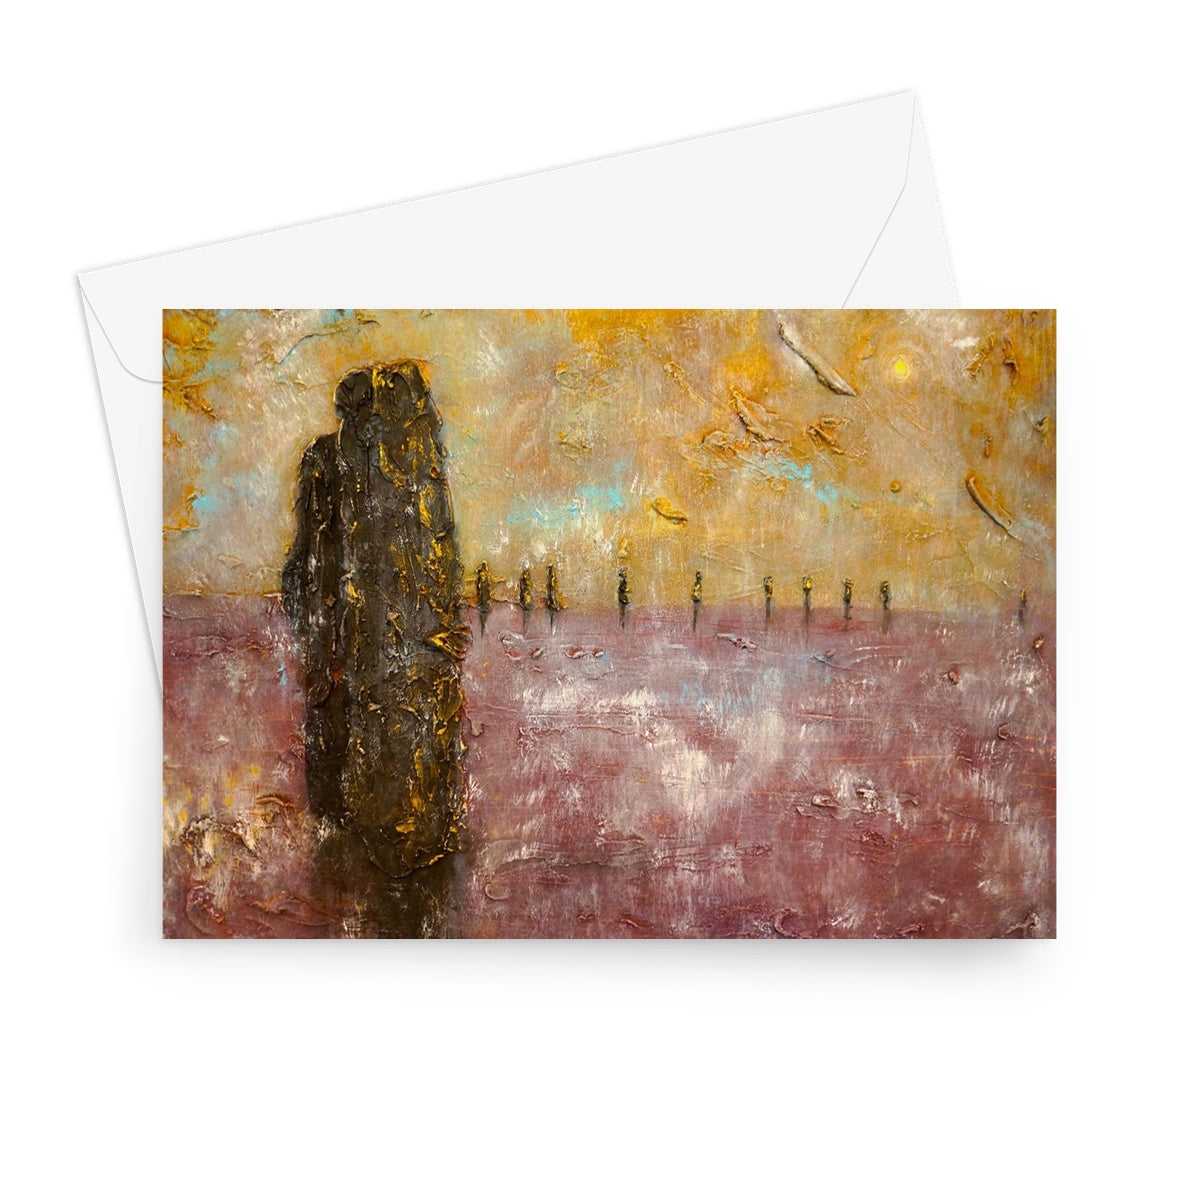 Brodgar Mist Orkney Art Gifts Greeting Card-Greetings Cards-Orkney Art Gallery-7"x5"-10 Cards-Paintings, Prints, Homeware, Art Gifts From Scotland By Scottish Artist Kevin Hunter